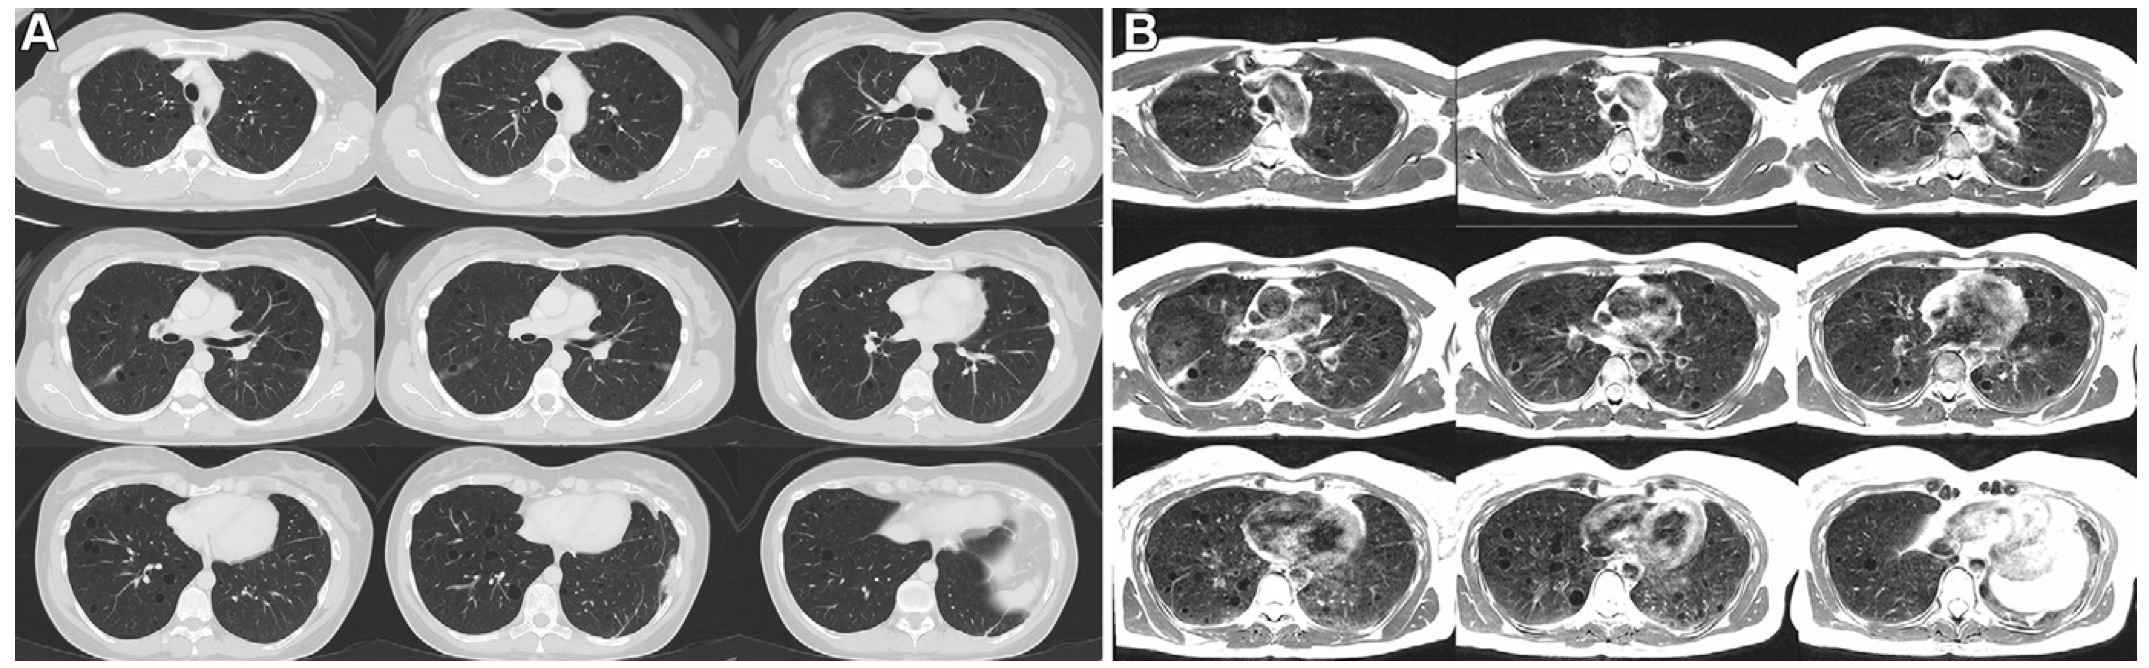 Axial multi-section imaging yielded full lung coverage using (A) CT (reformatted to 0.8 × 0.8 × 6 mm) and (B) T2-weighted MRI (1.1 × 1.1 × 6 mm) in a 41-year-old woman with lymphangioleiomyomatosis resulting in innumerable thin-walled pulmonary cysts.

Credit: RSNA